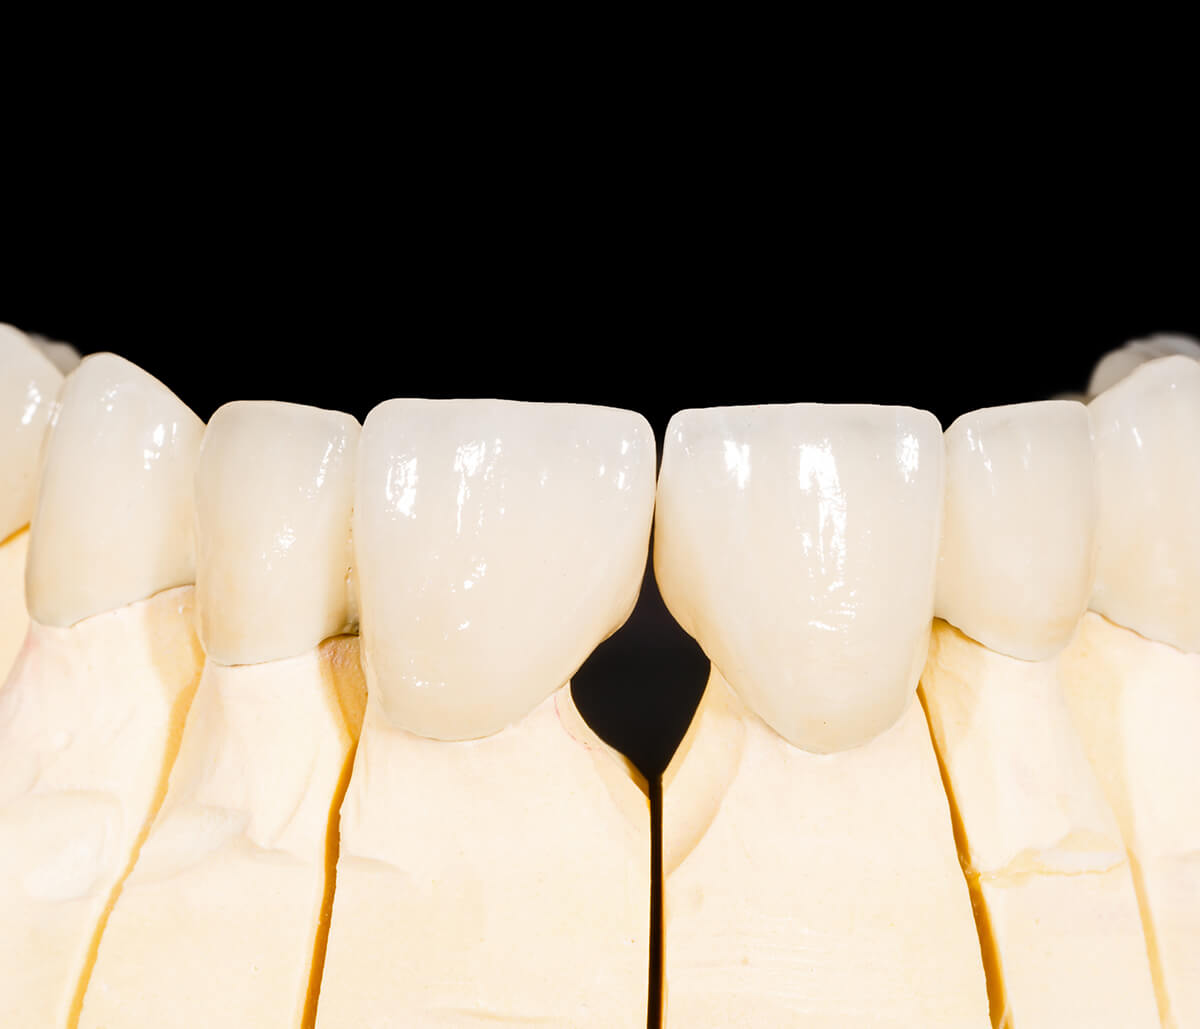 Ramsin K. Davoud DDS Cost of zirconia implants: Quality, durable non-metal tooth replacement in Turlock, CA is an exceptional value